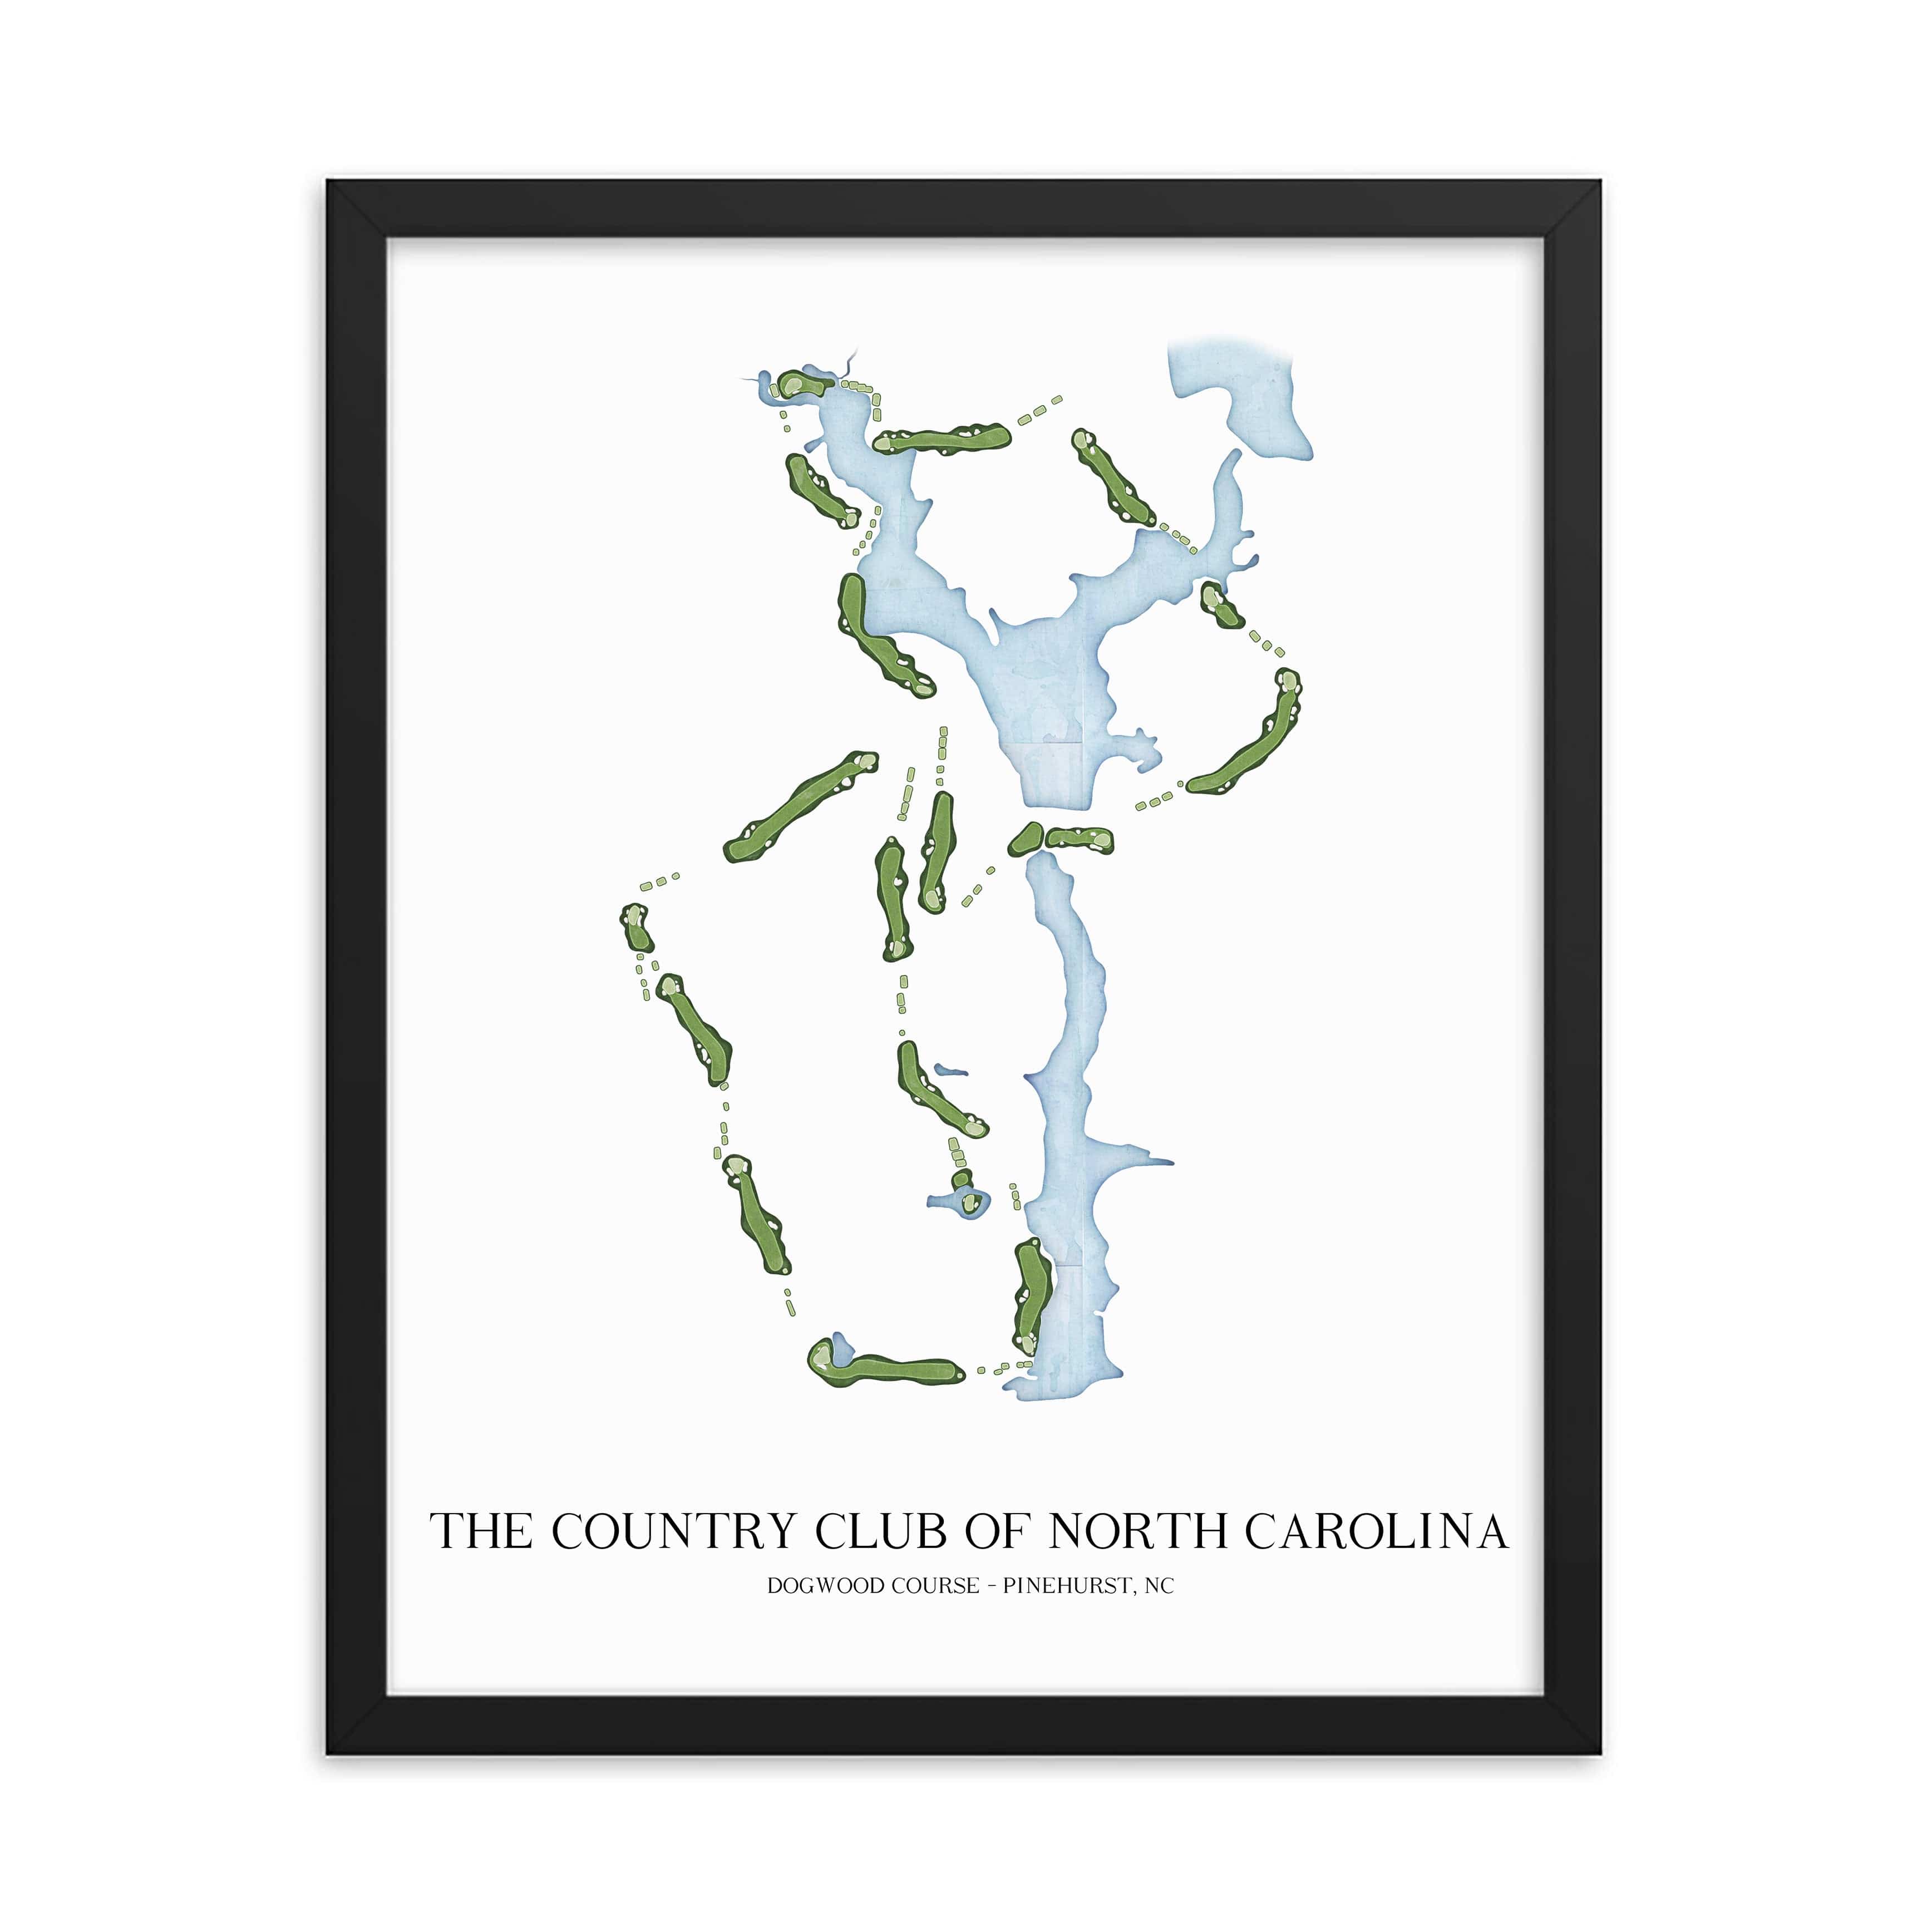 The 19th Hole Golf Shop - Golf Course Prints -  The Country Club of North Carolina - Dogwood Golf Course Map